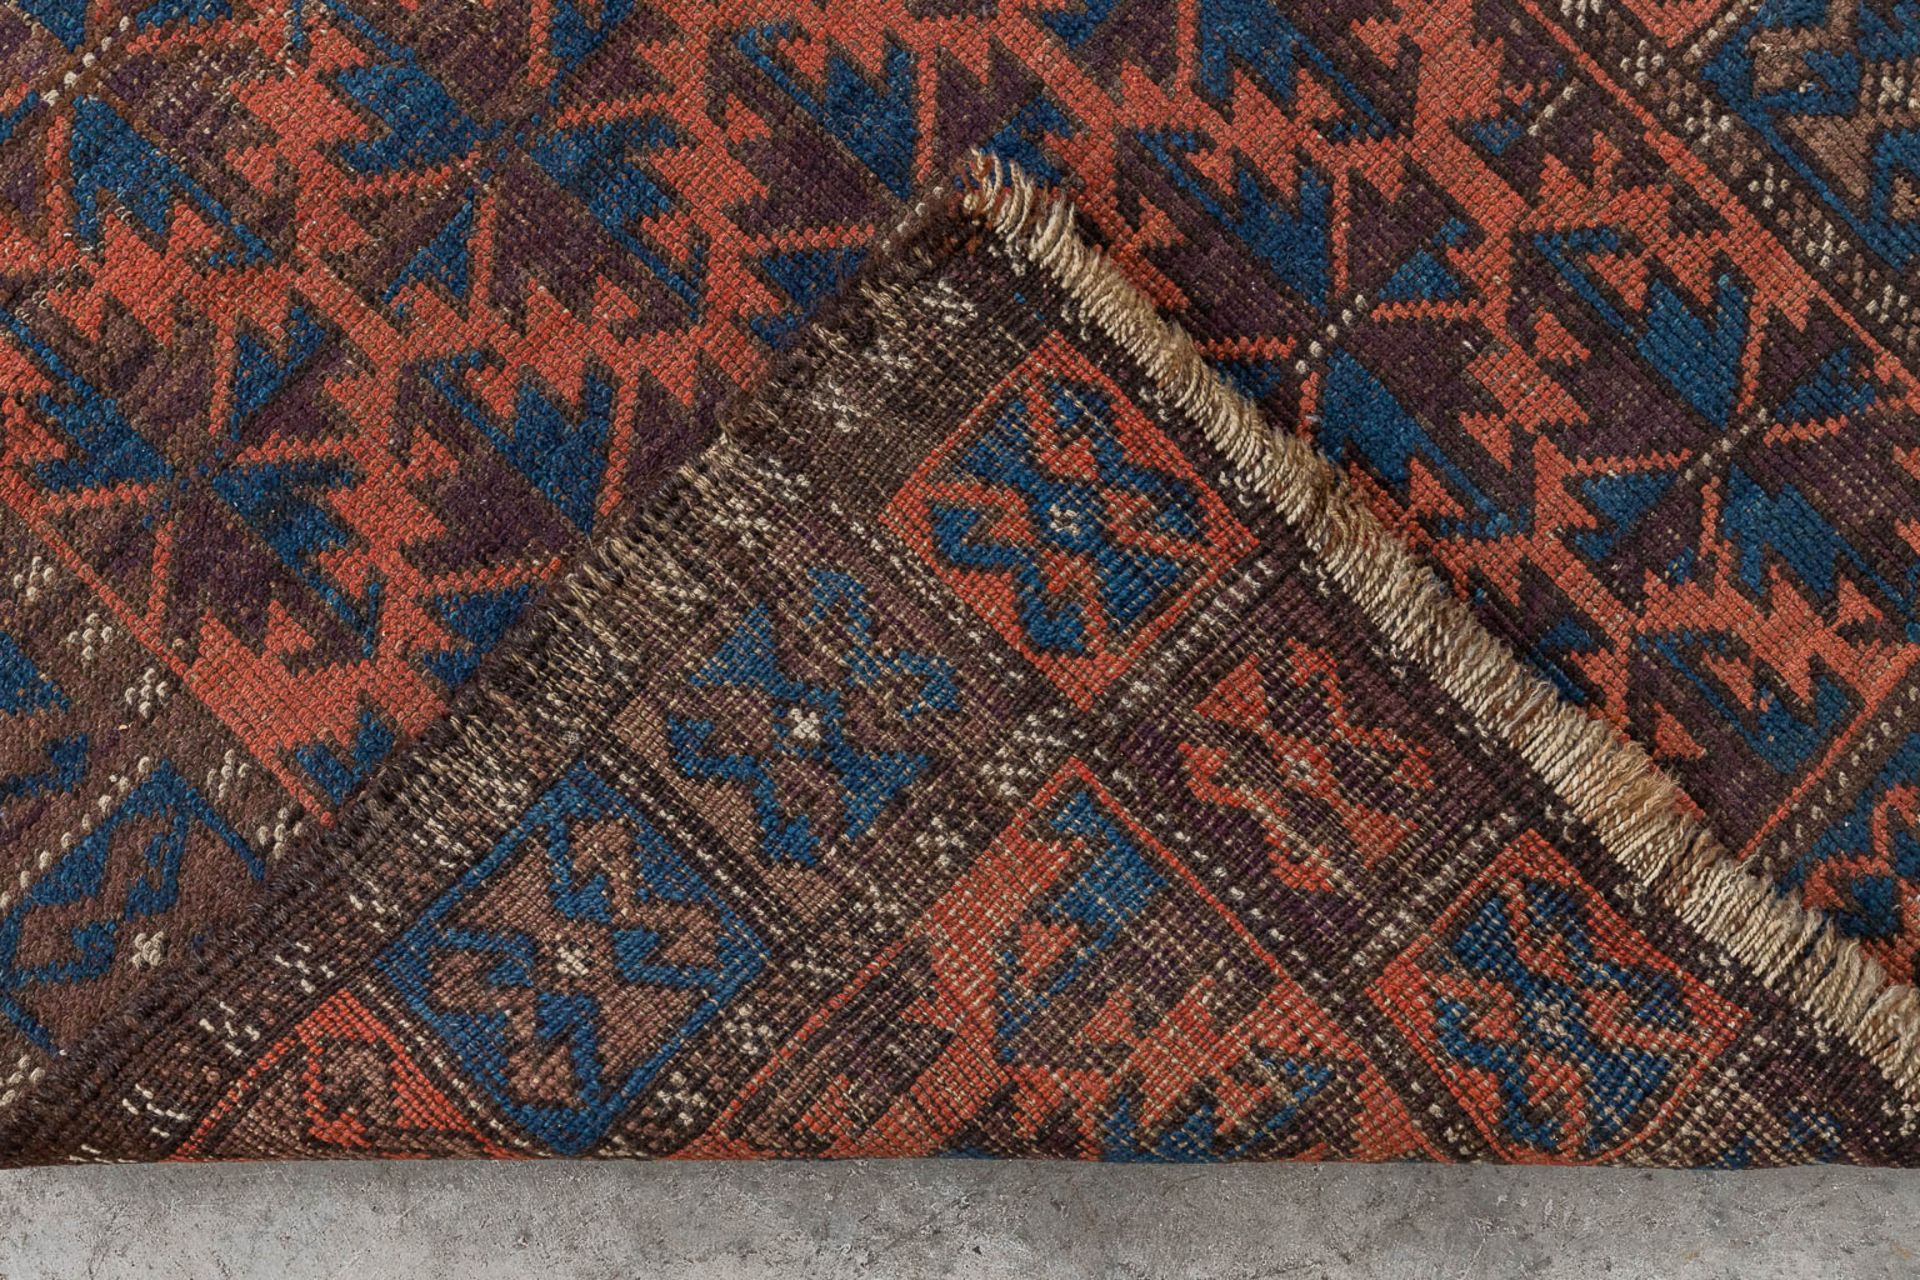 A collection of 3 Oriental hand-made carpets, probably Caucasian. (L: 157 x W: 116 cm) - Image 10 of 11